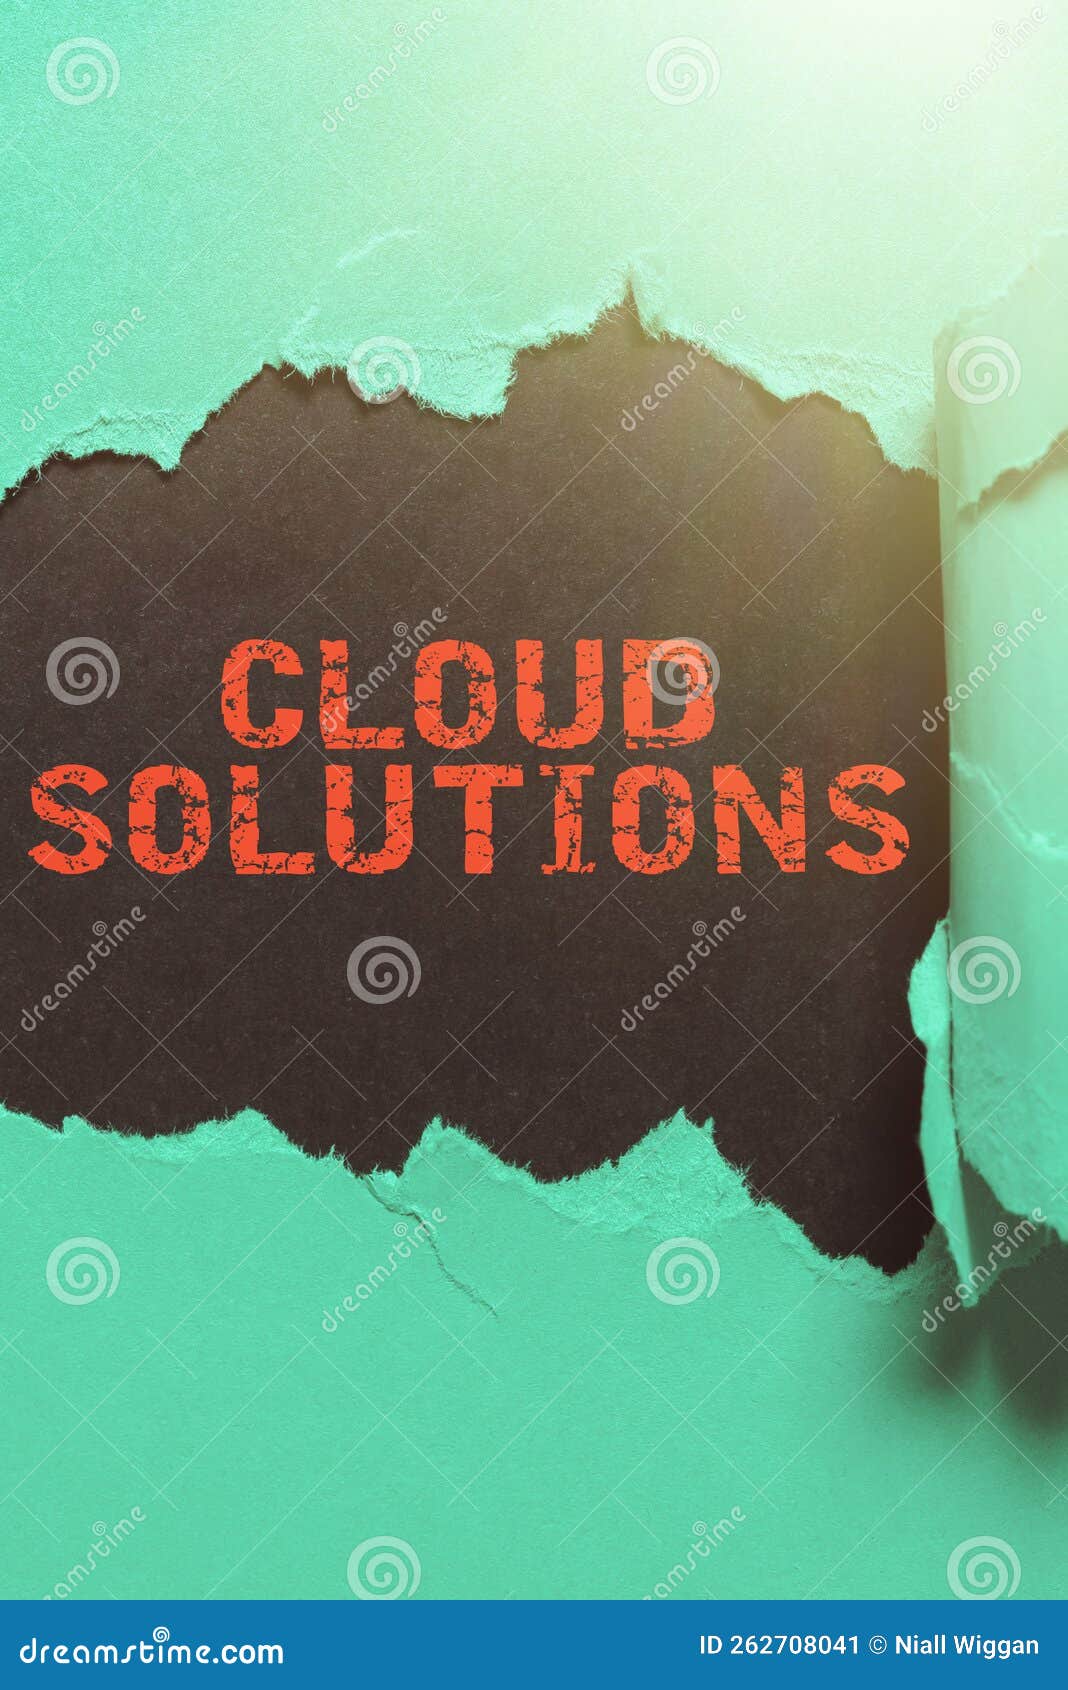 text caption presenting cloud solutions. business idea ondemand services or resources accessed via the internet